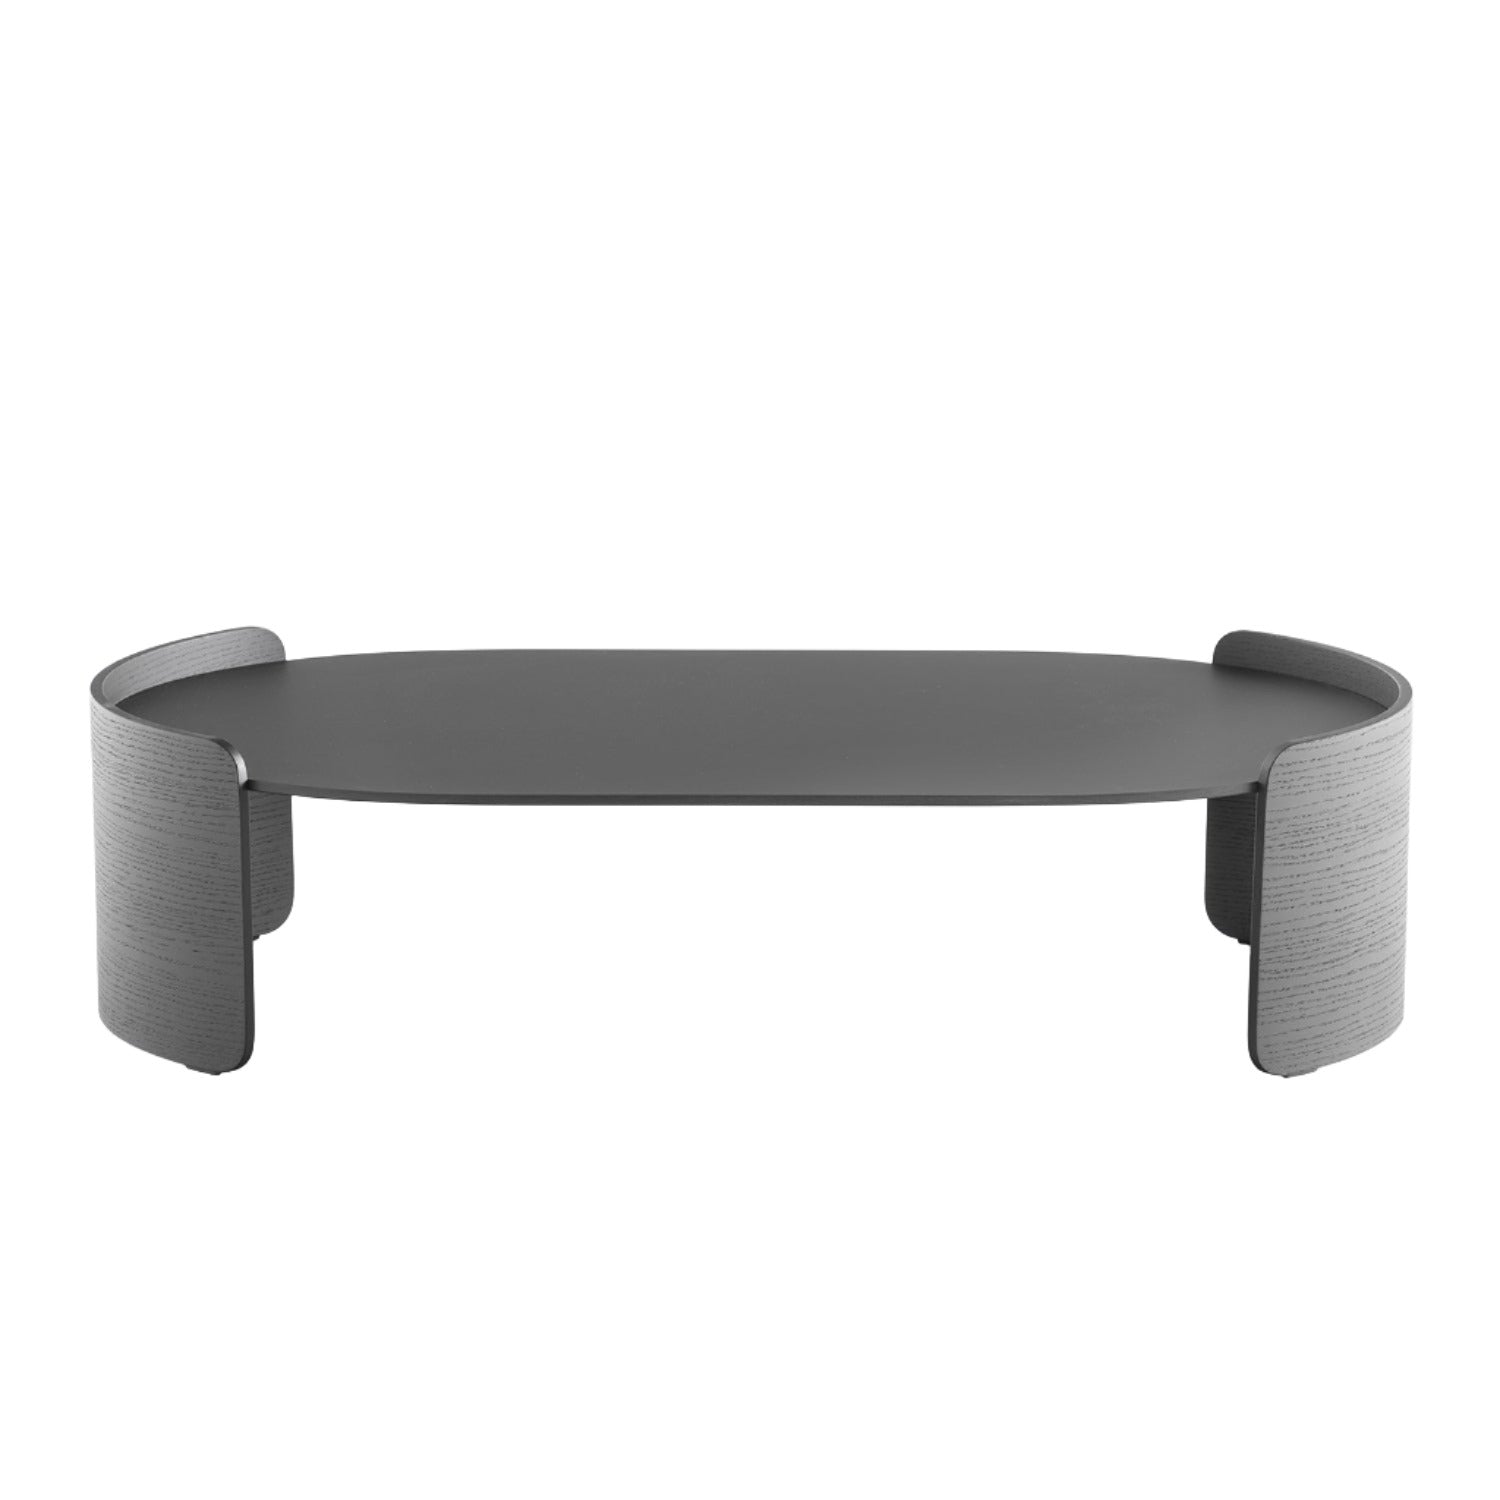 Pedrali Parenthesis 120cm coffee table in black oak frame and black laminate top